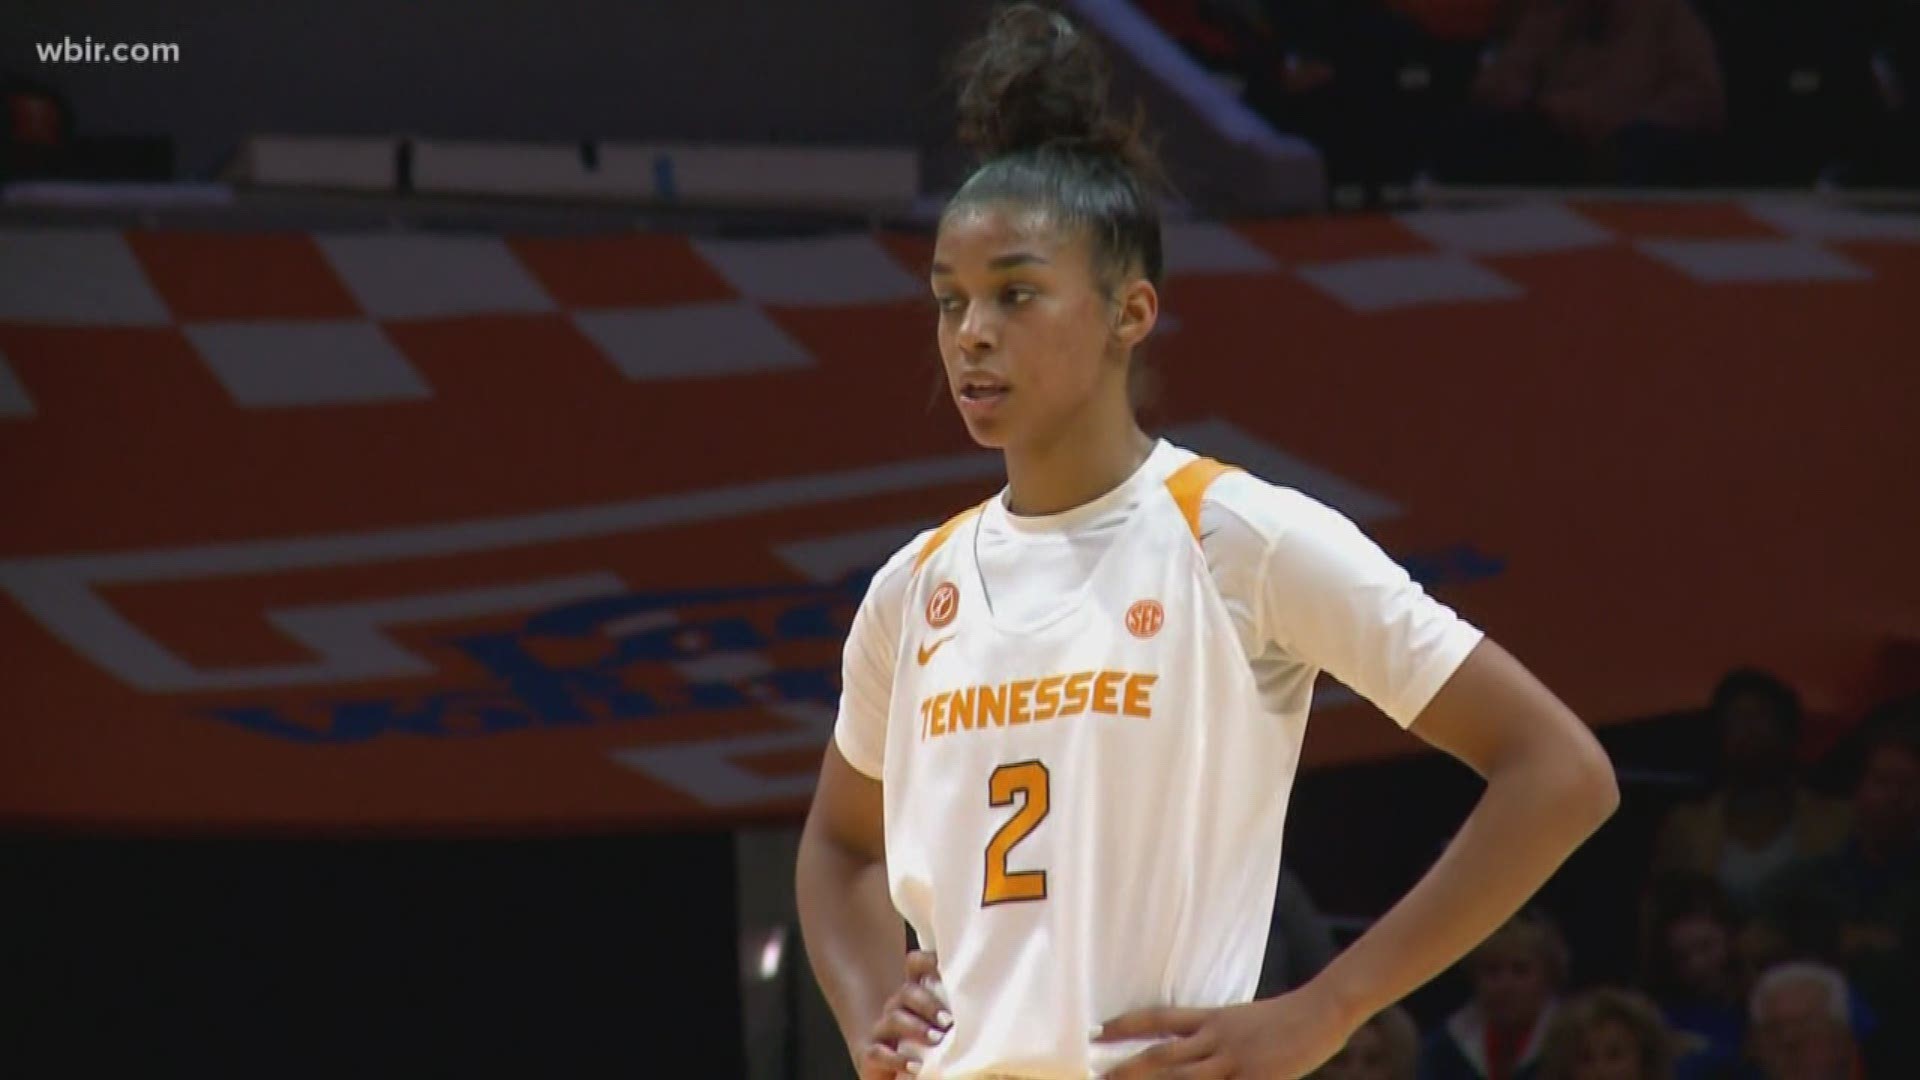 The sophomore guard has decided to transfer from UT.